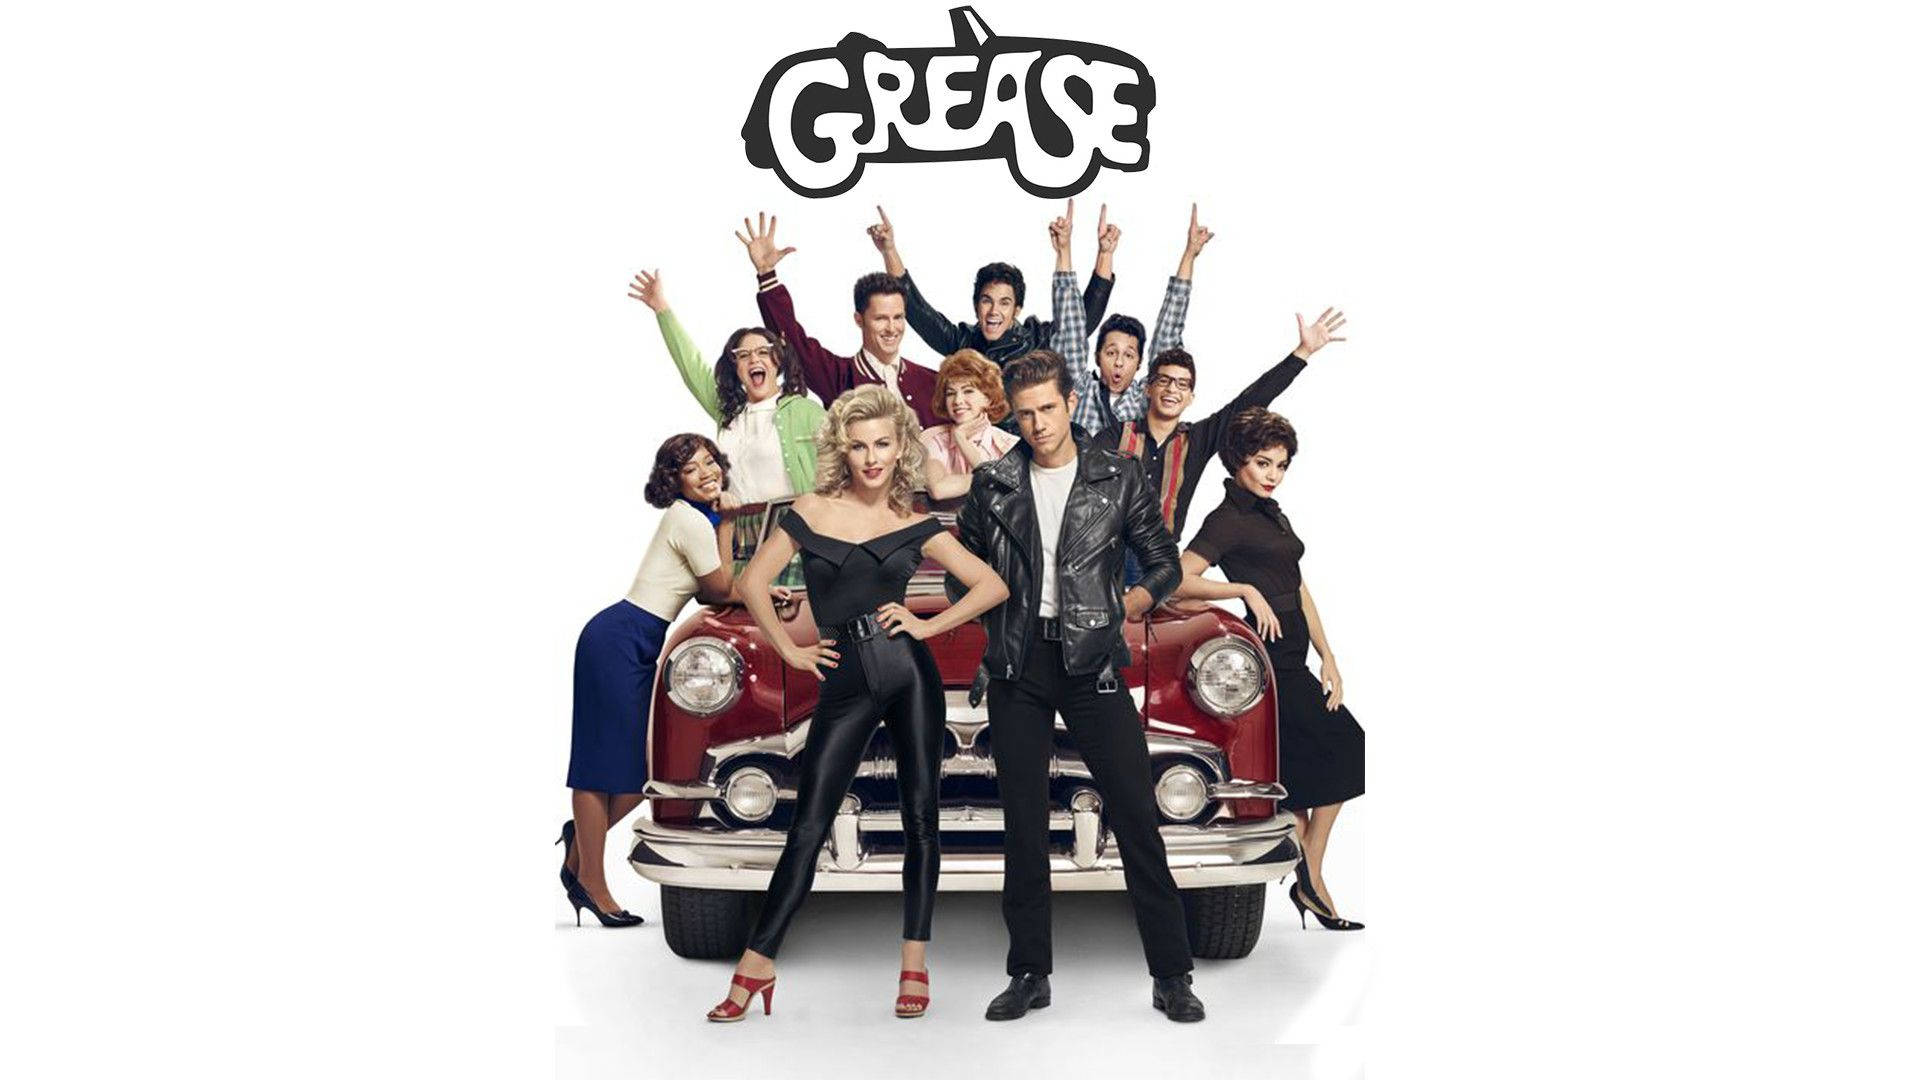 Iconic Poster Of The Grease Movie Remake Background